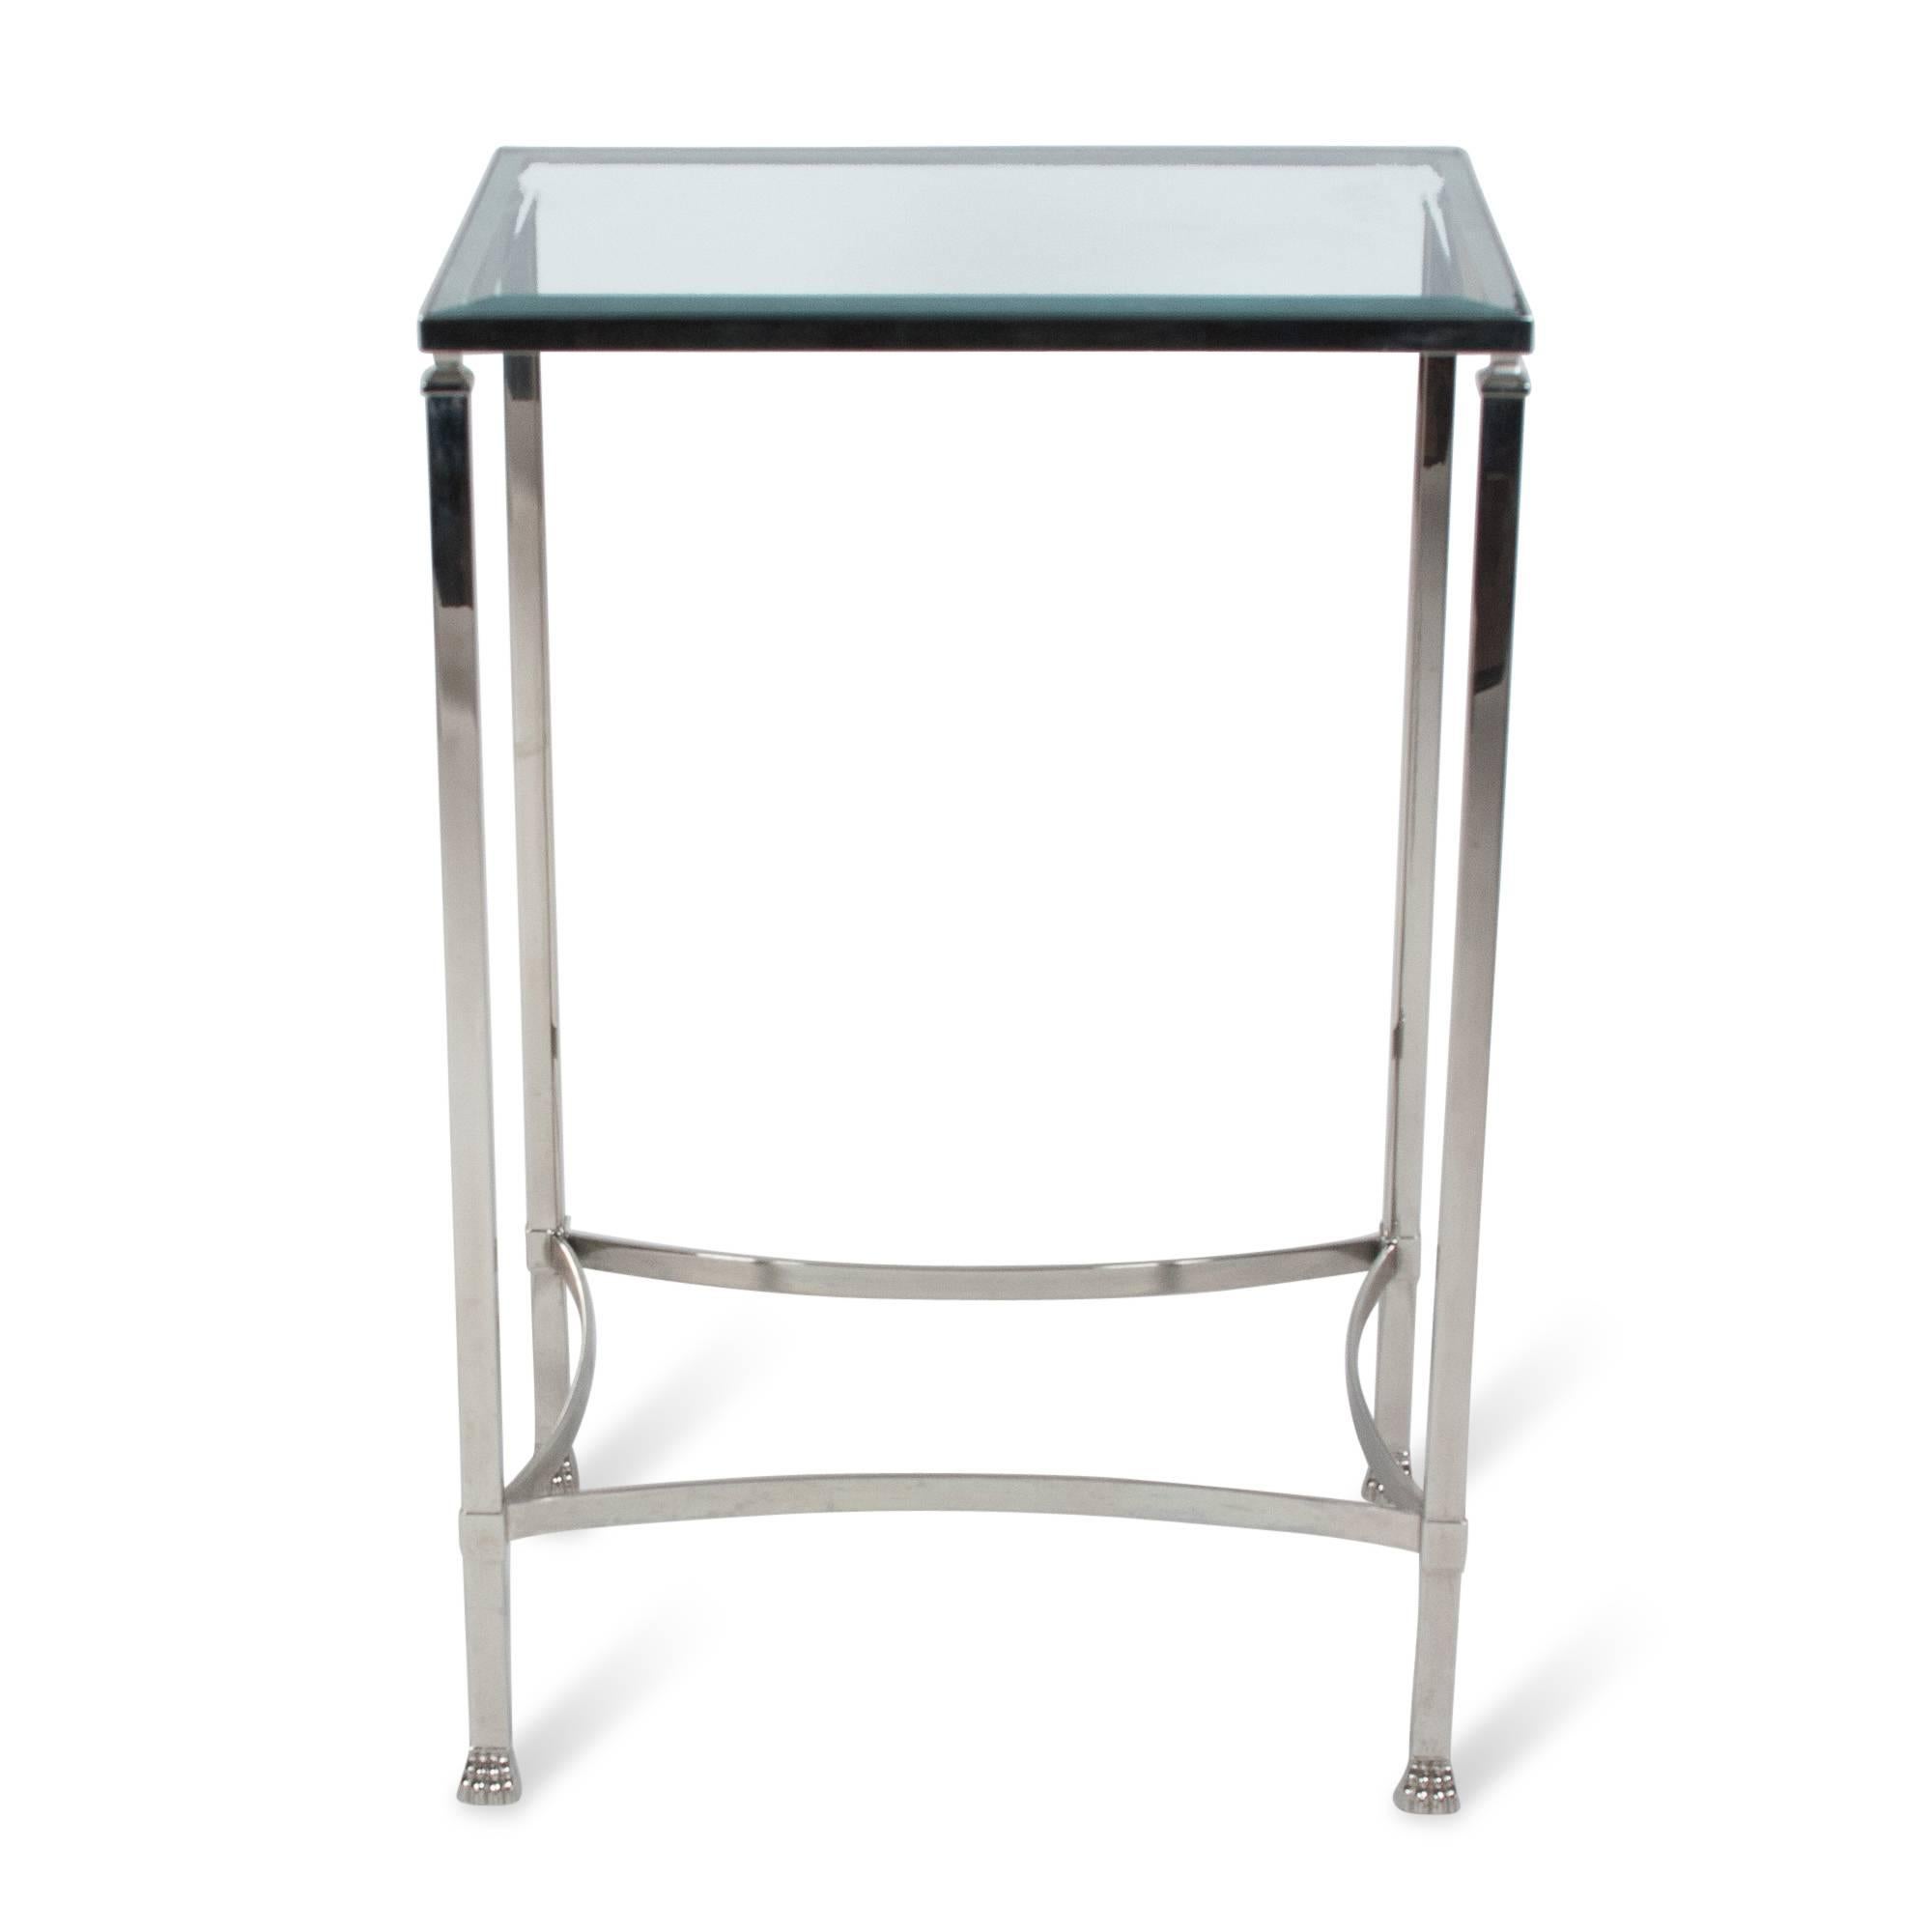 Stainless steel rectangular glass top side table, beveled glass, paw feet, by Philippe Starck, France 1980s. Measures: 33 1/4 in H, 22 in W x 16 in D.